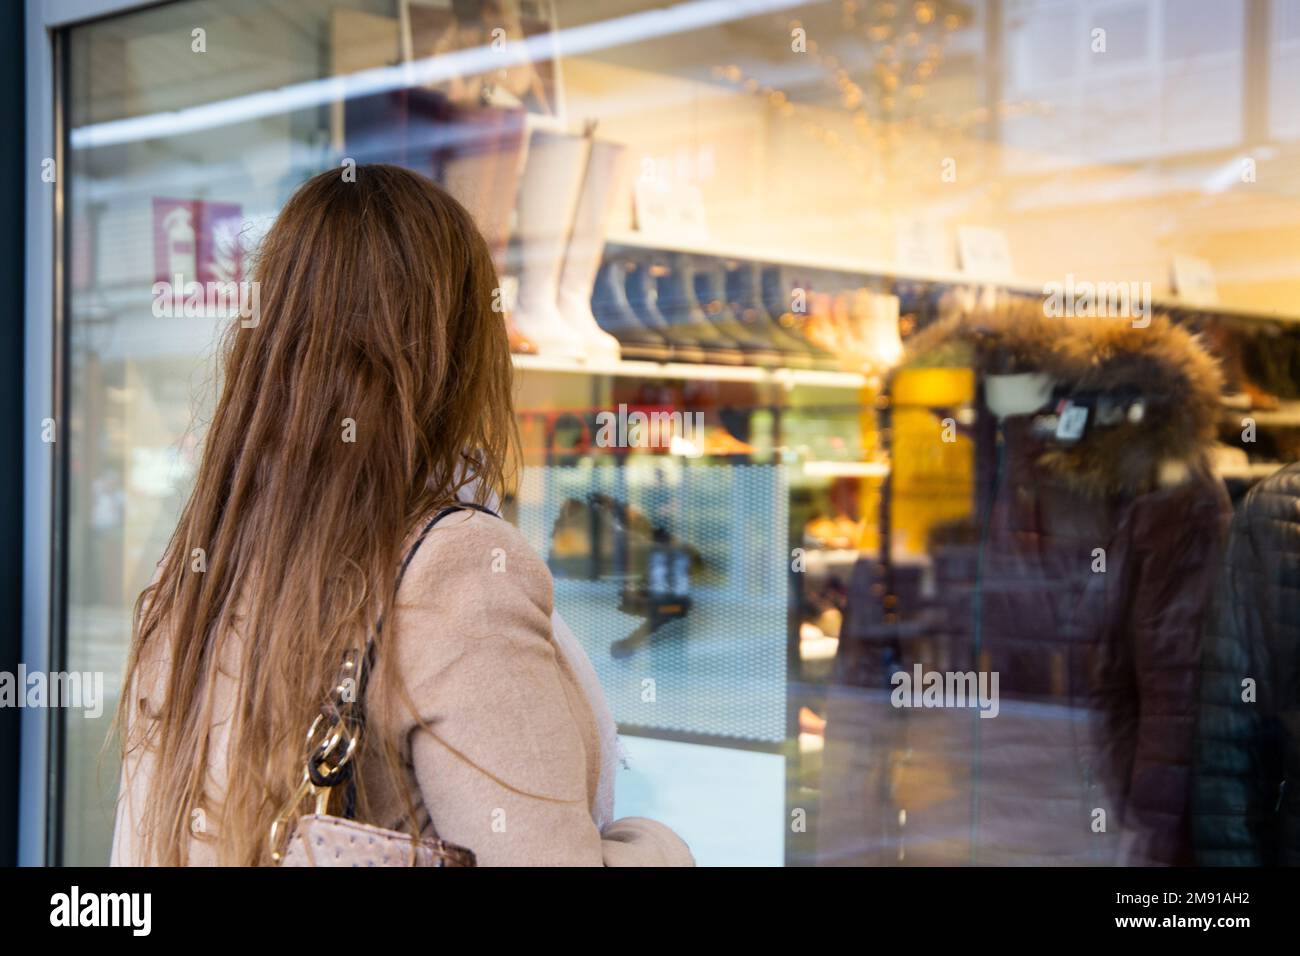 Symbol image shopping: Young woman standing in front of a shoe shop (Model released) Stock Photo